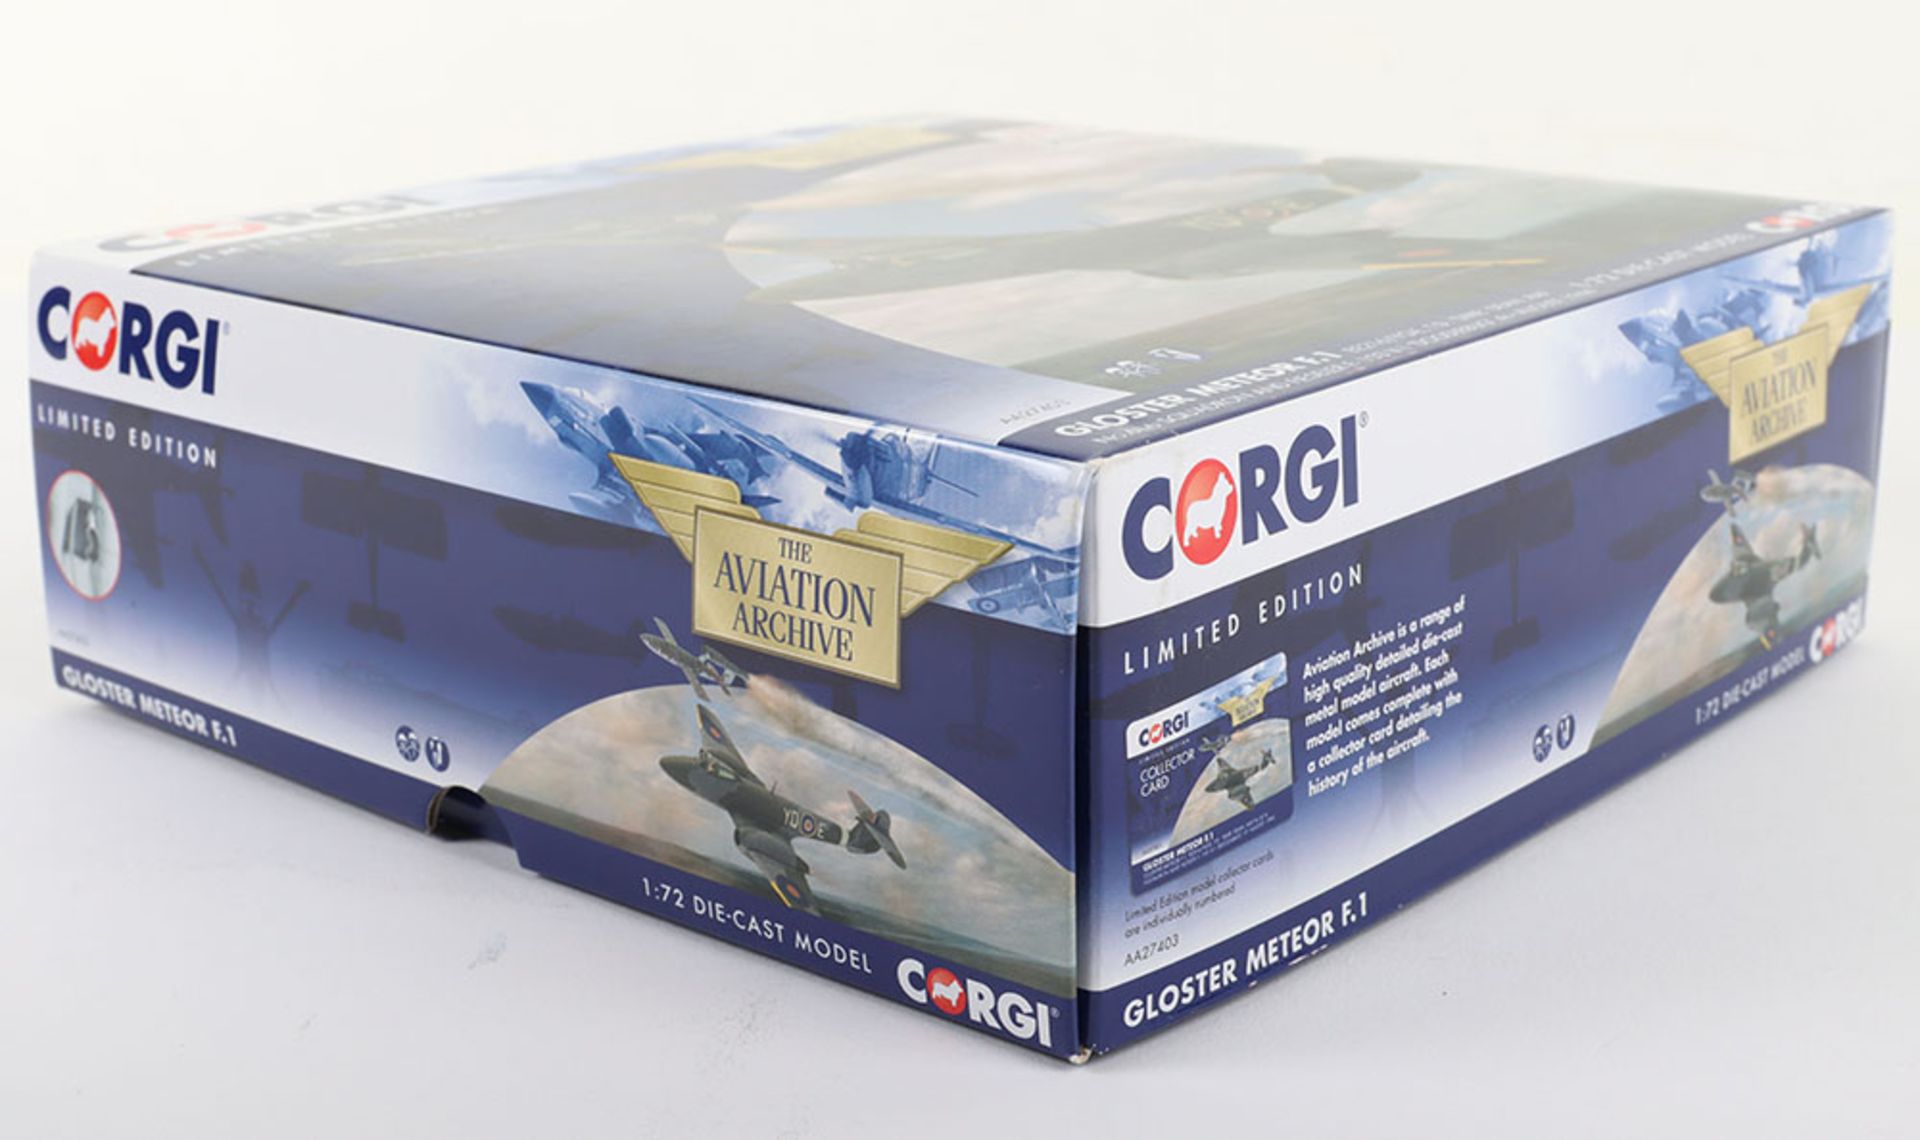 Corgi “The Aviation Archive” AA27403 Gloster Mereor boxed models - Image 4 of 7